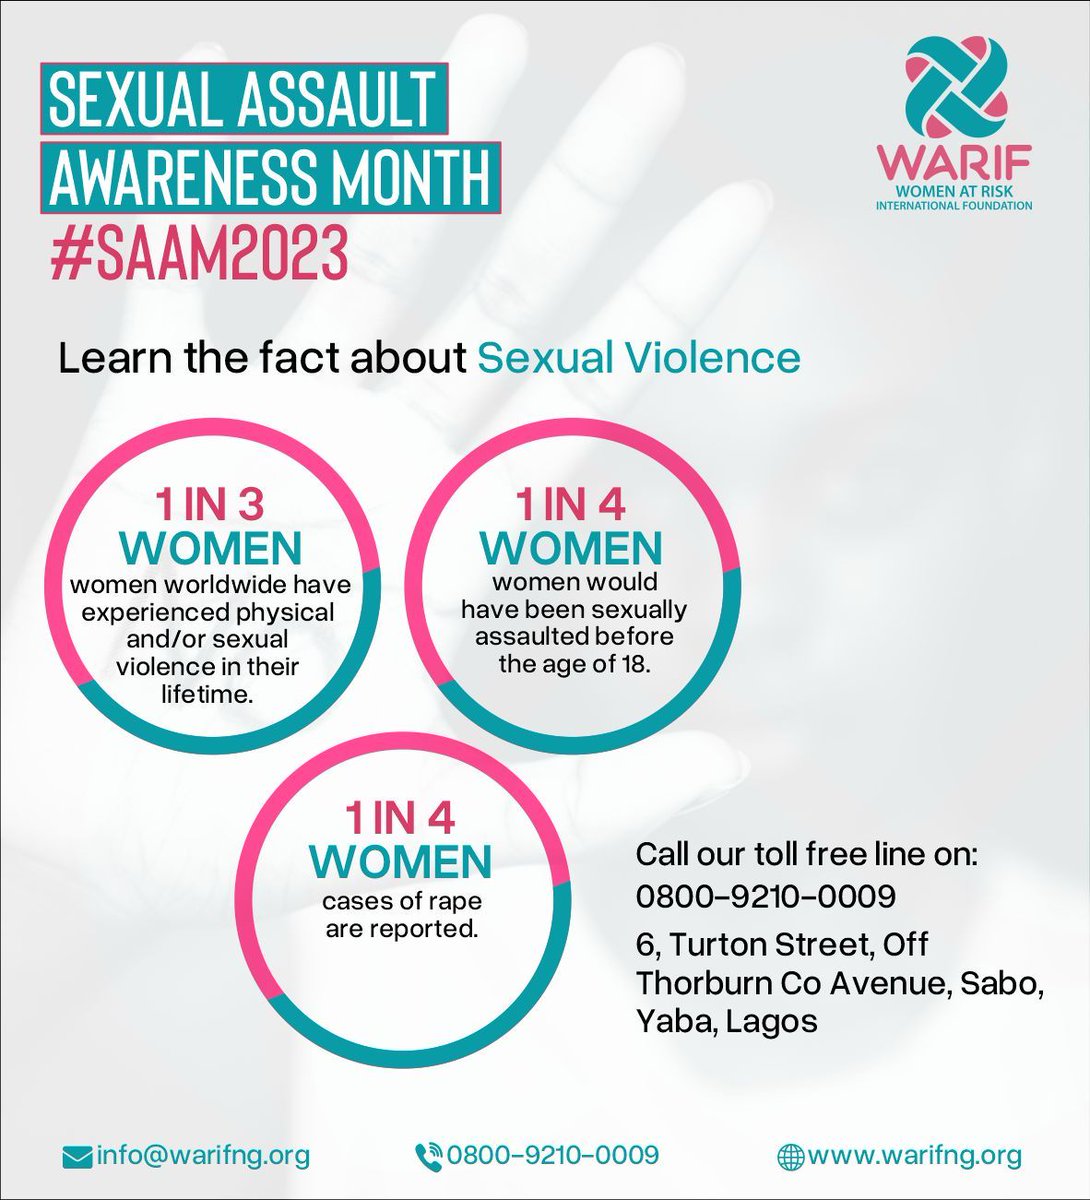 The statistics and facts are TRUE! It's crucial to stand by and advocate for all survivors, particularly when they bravely confide in you and share their stories. #saam2024 #sexualassault #WARIF